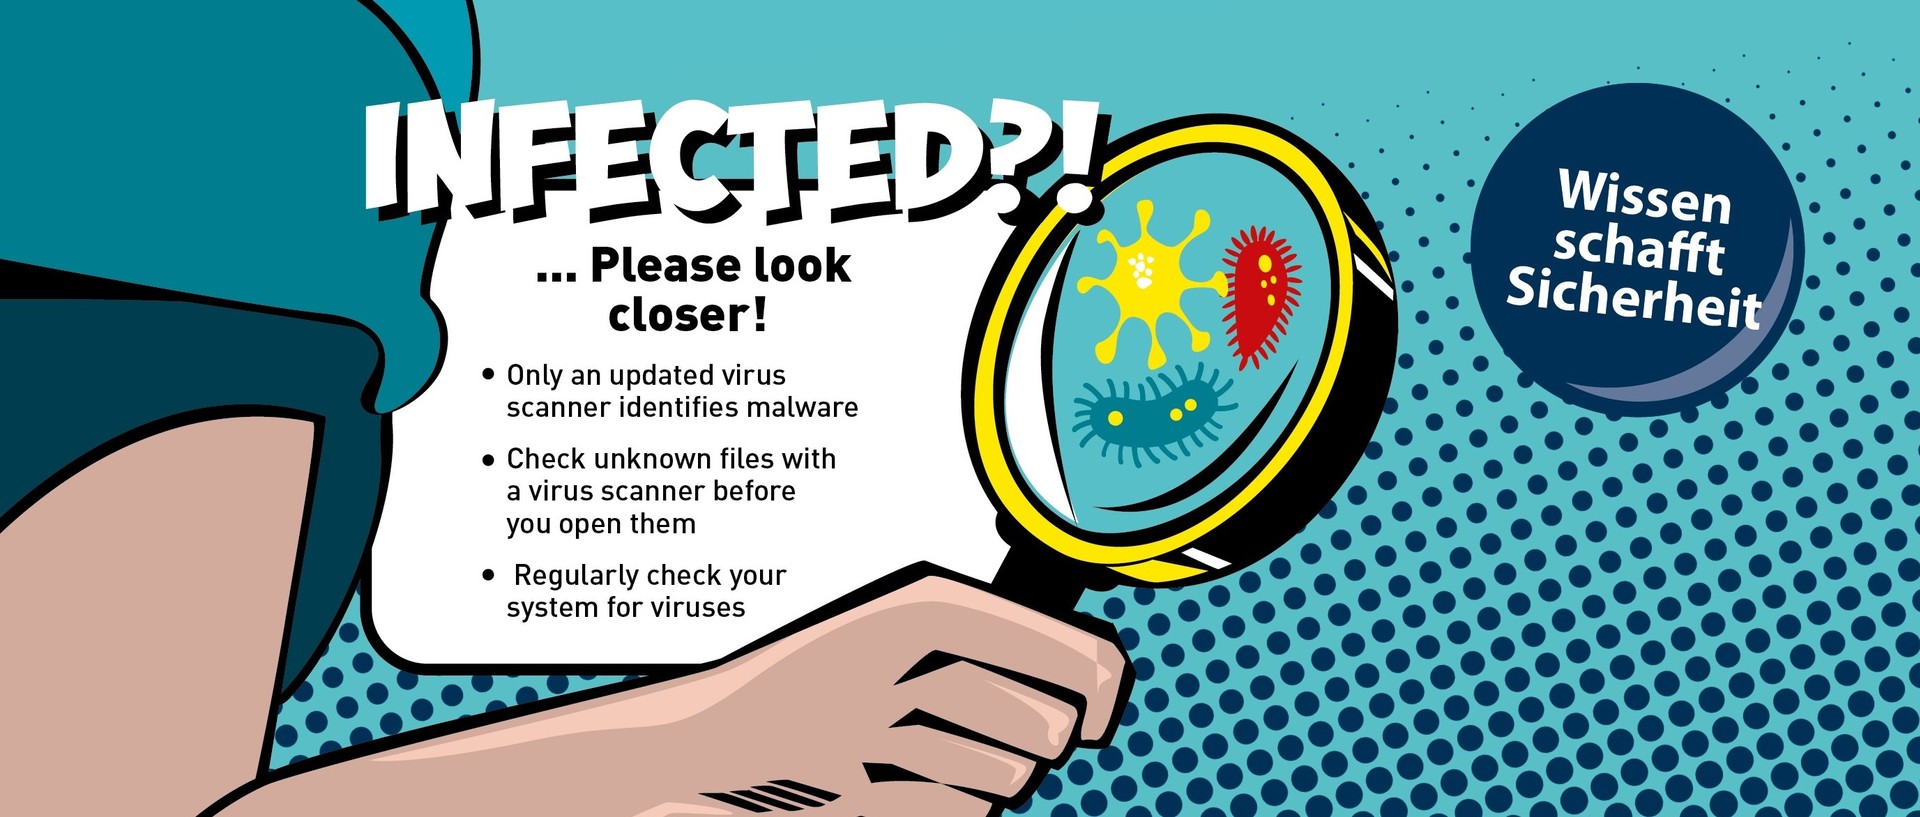 More information on viruses and virus scanners